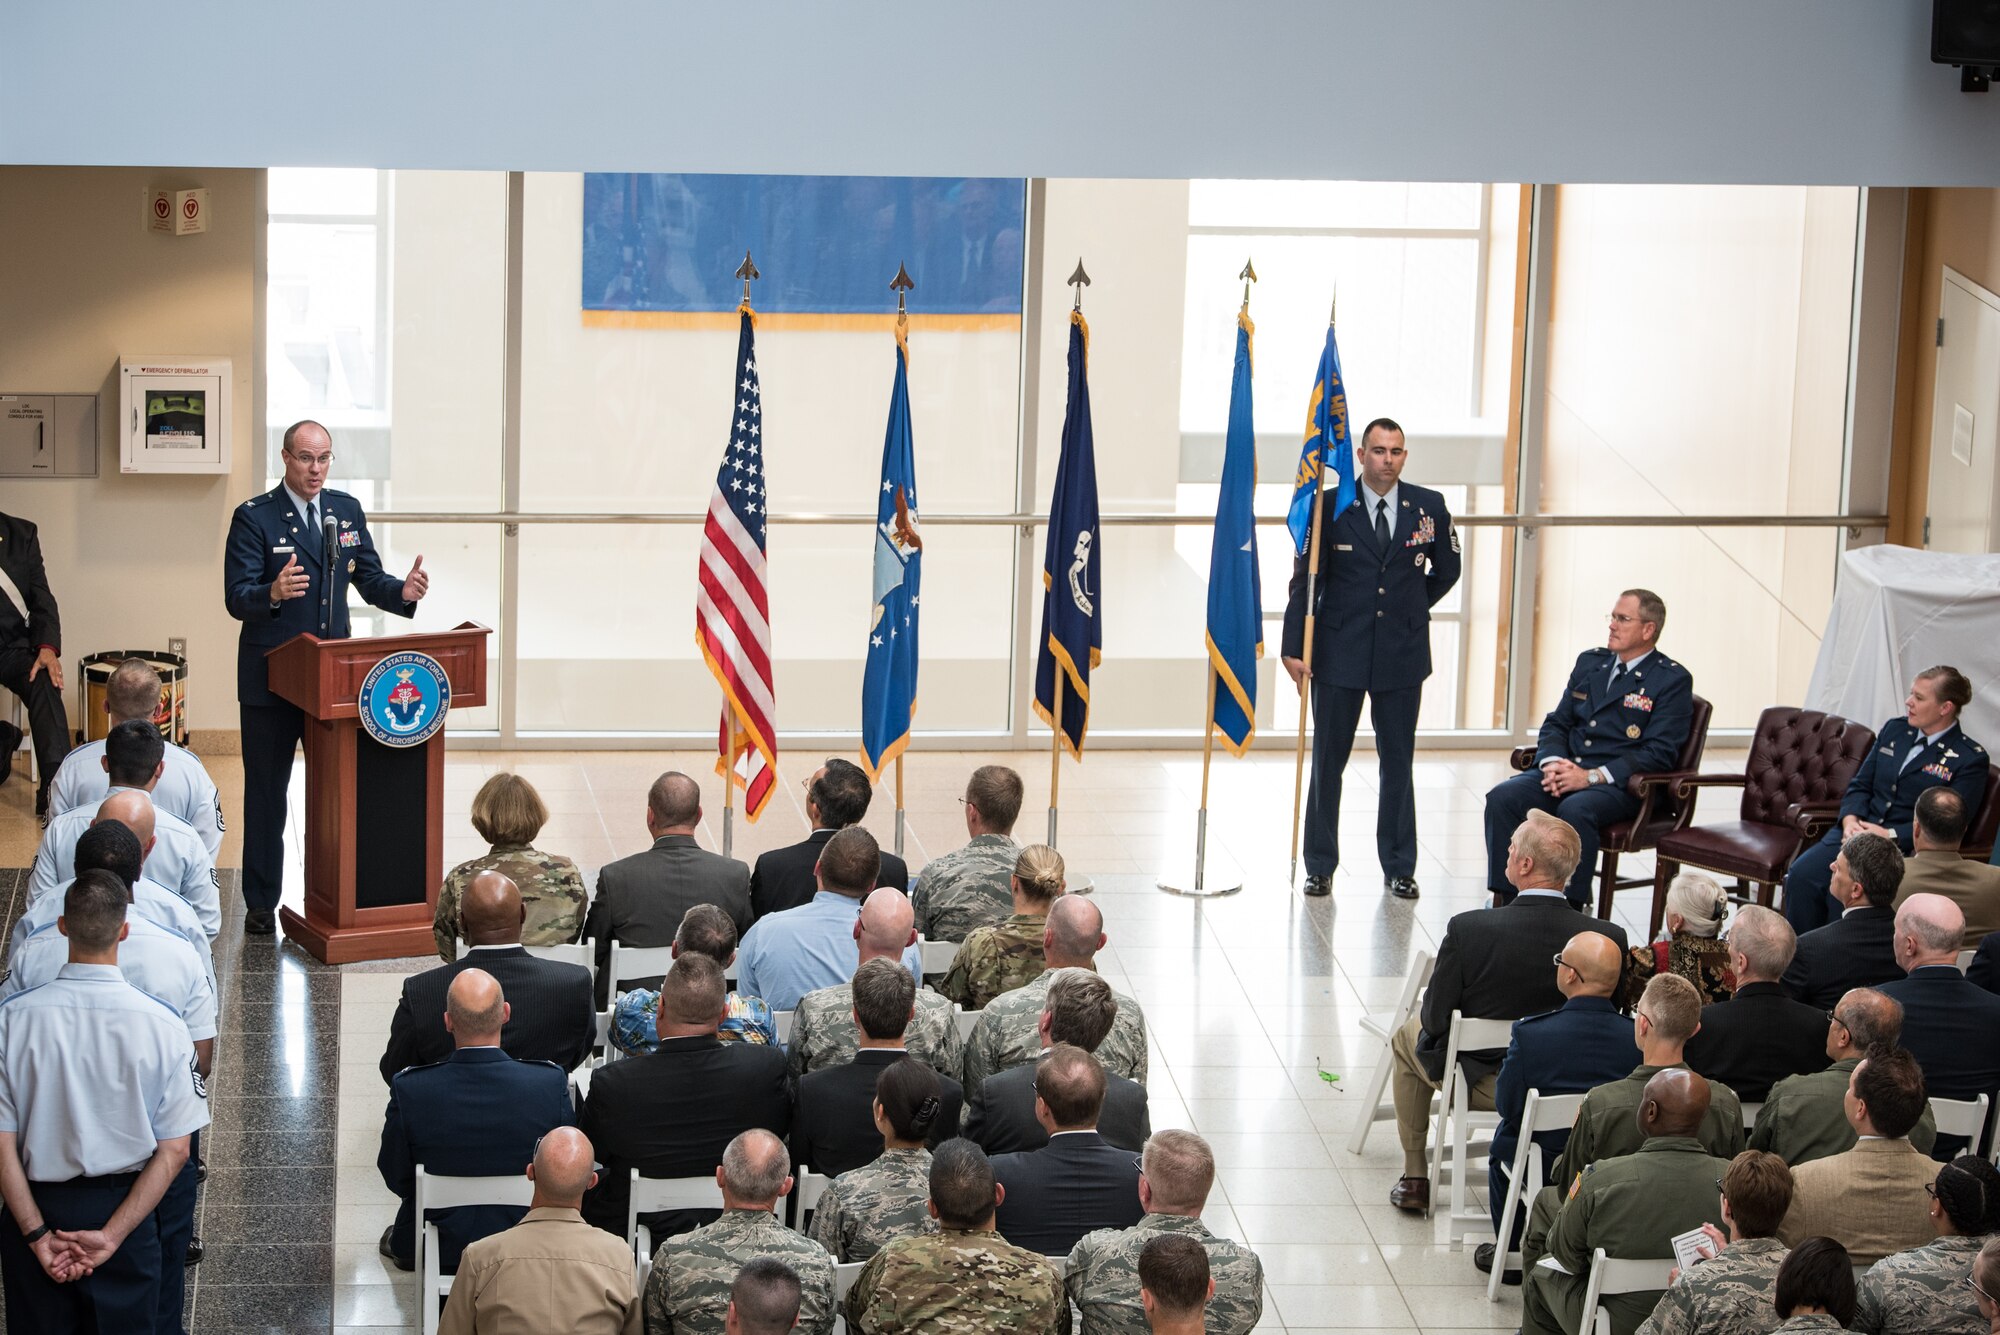 Col. (Ret.) Alden Hilton speaks to the crowd at the U.S. Air Force School of Aerospace Medicine Change of Command ceremony July 19 in the atrium of the schoolhouse. (U.S. Air Force photo/Richard Eldridge)